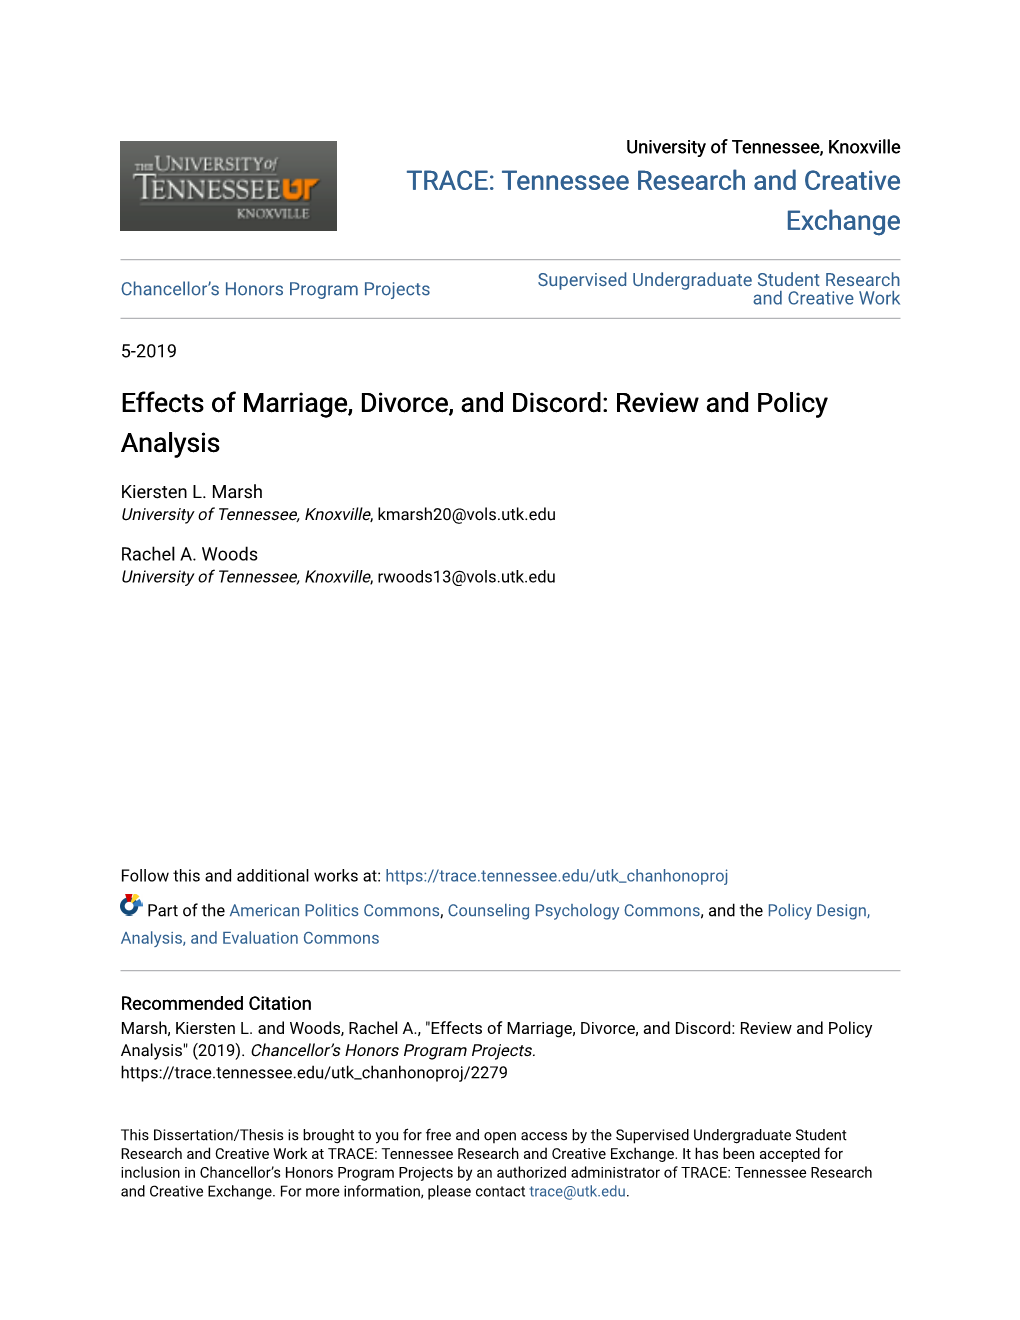 Effects of Marriage, Divorce, and Discord: Review and Policy Analysis